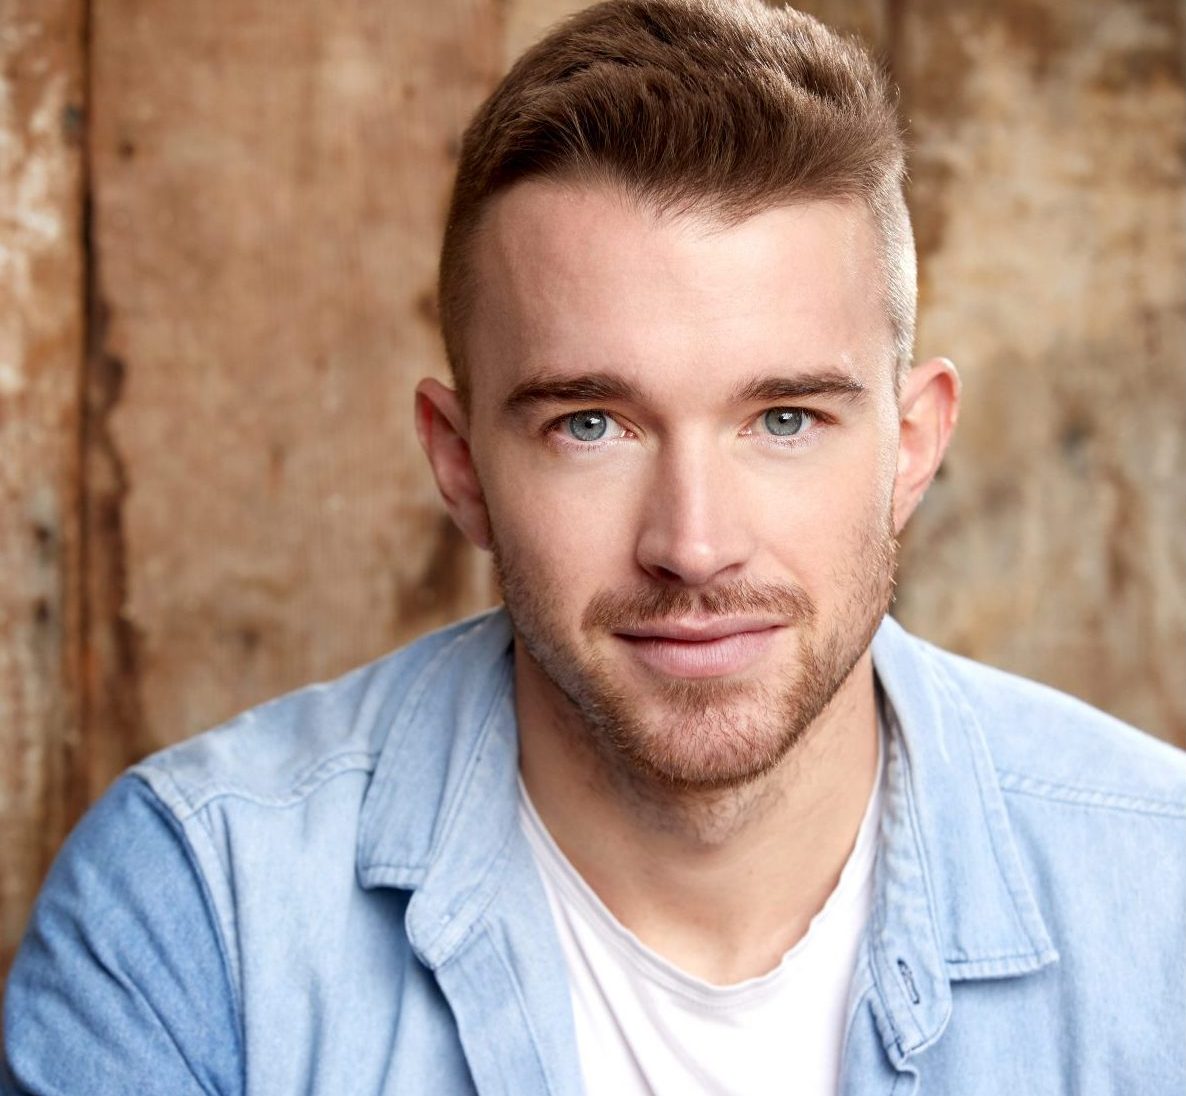 DAYS Chandler Massey Chats On His Bittersweet Daytime Emmy Nomination.